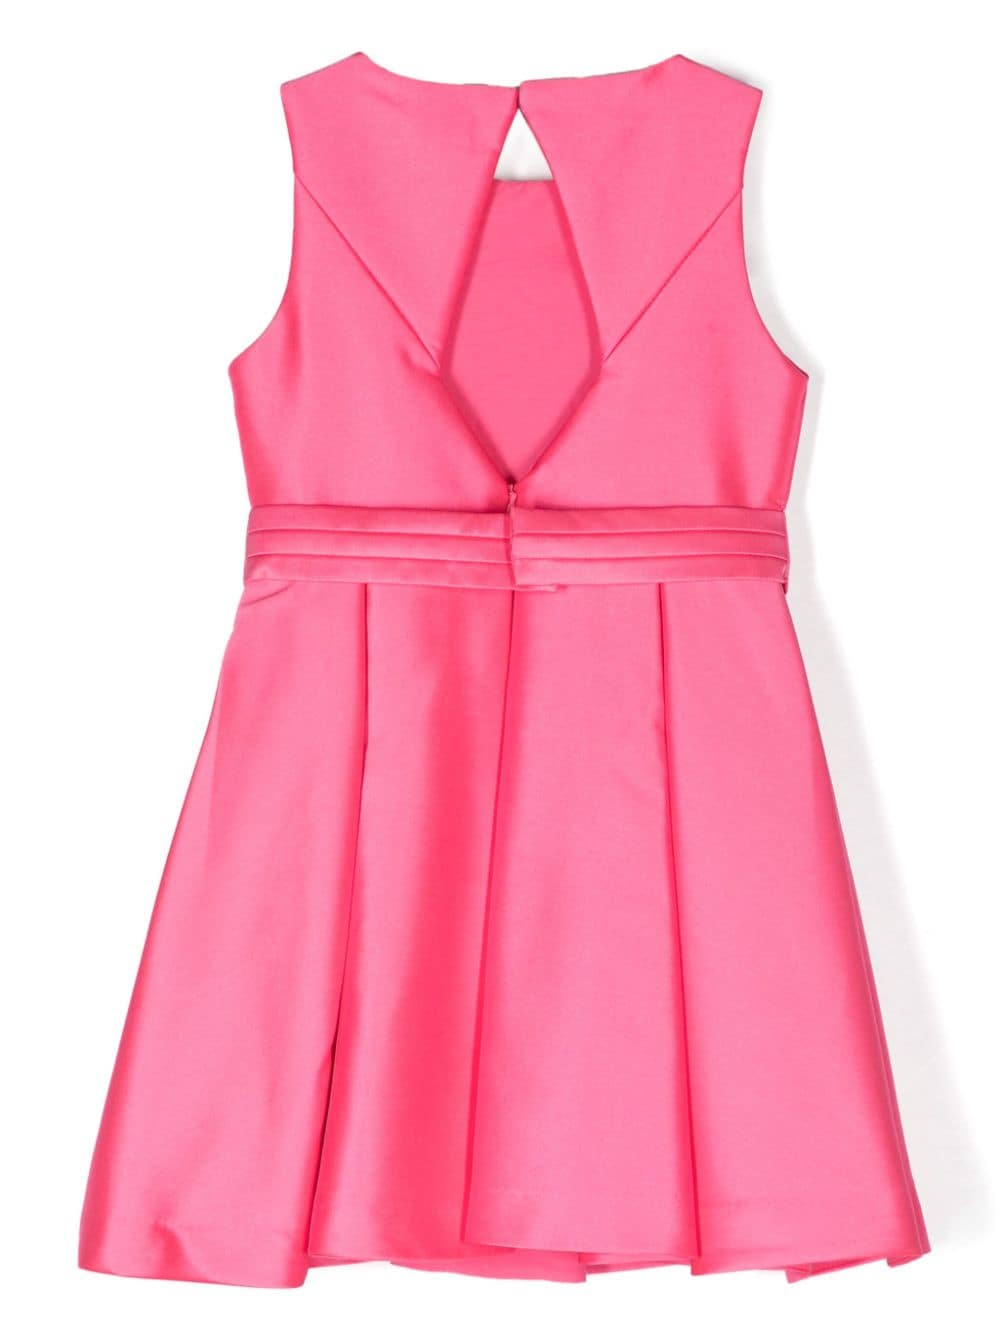 Fuchsia dress for girls with bow